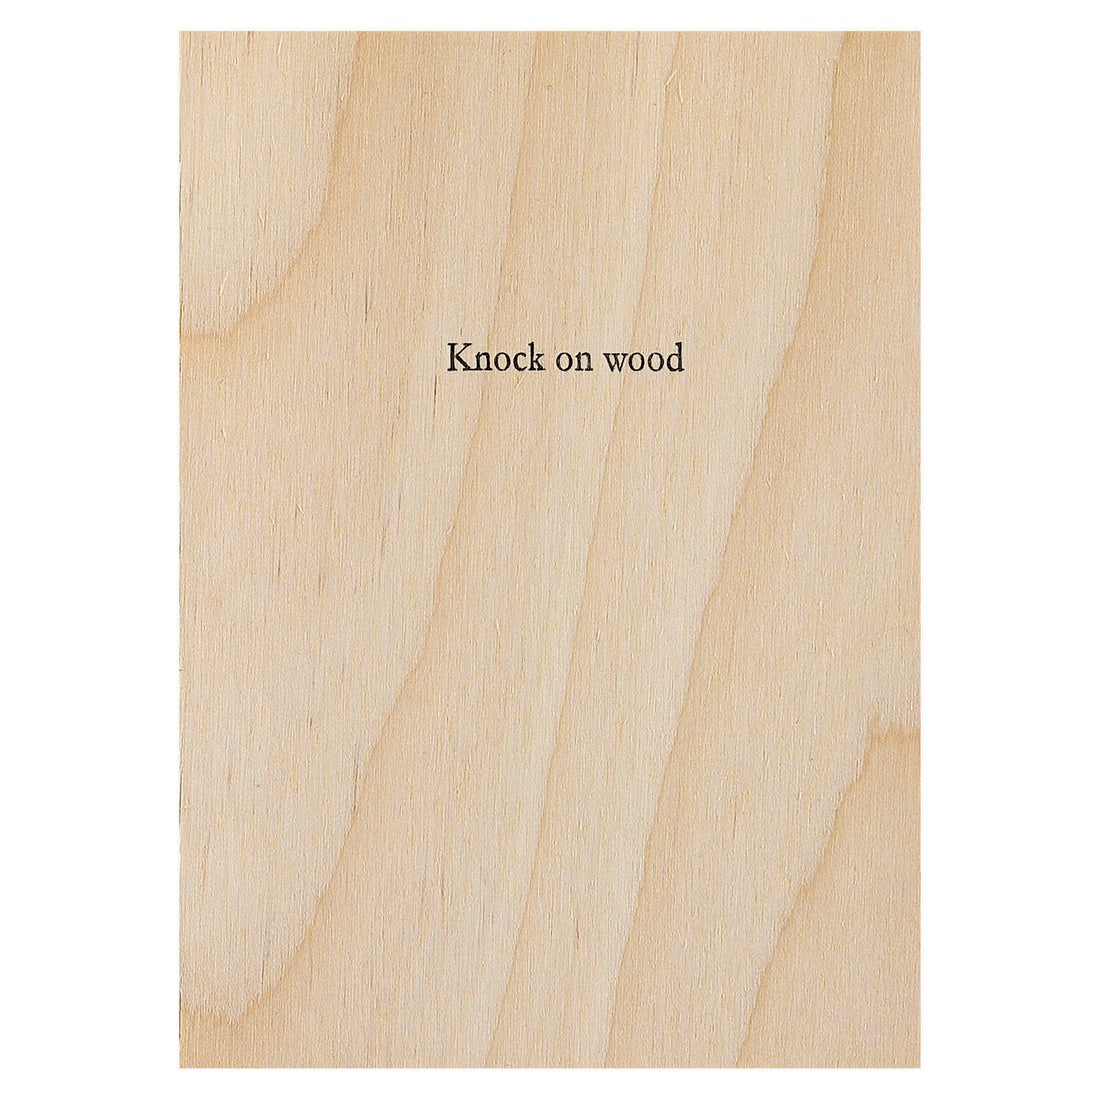 Hat Wig Glove Knock on Wood Greeting Card 